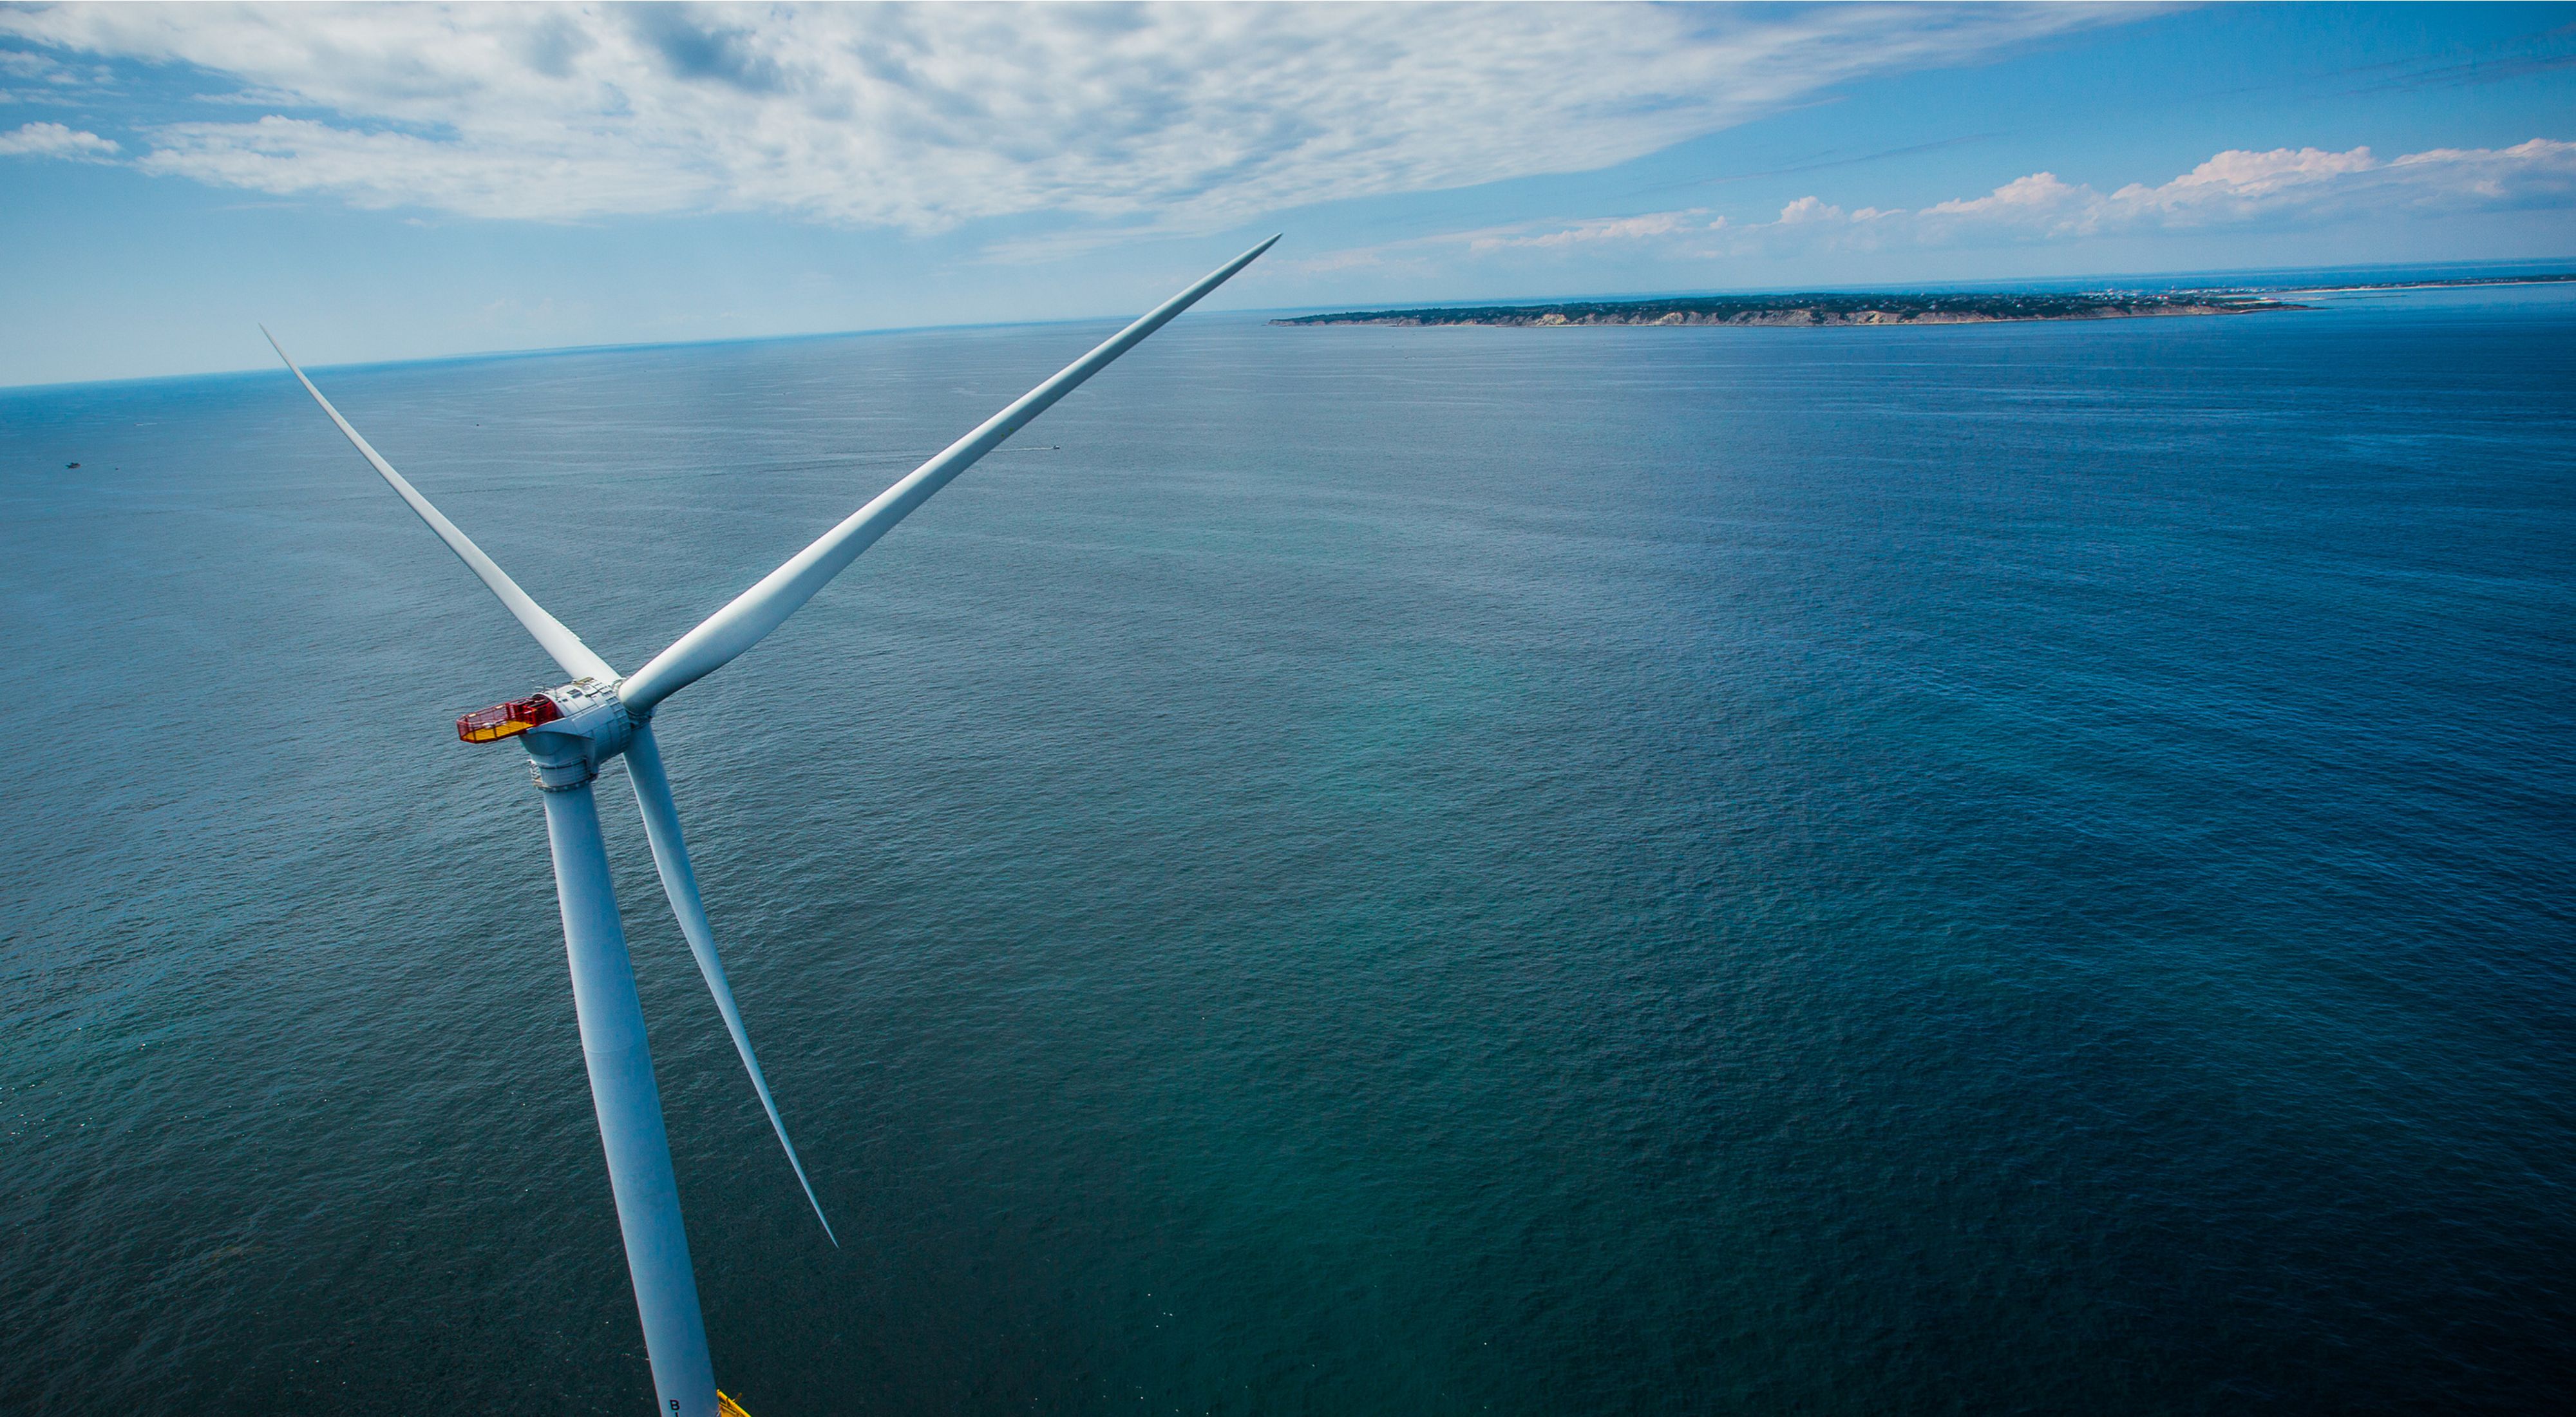 A wind turbine is pictured at left and sits on top of a wide open ocean, with a small patch of land with green grass in view. Clouds are seen on a blue sky.